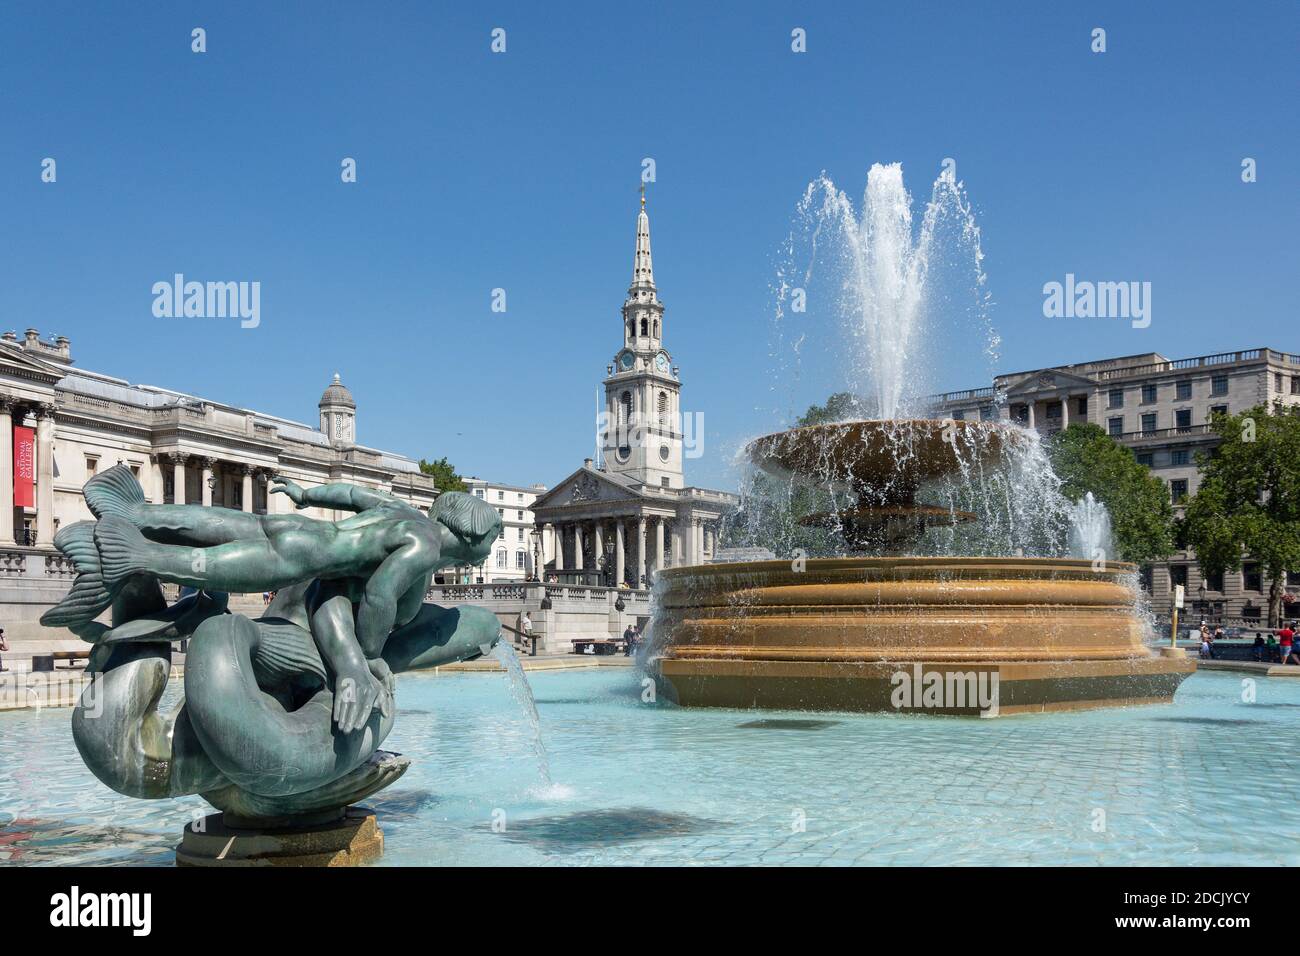 Fountain, National Gallery et St Martin-in-the-Fields Church, Trafalgar Square, Cité de Westminster, Grand Londres, Angleterre, Royaume-Uni Banque D'Images